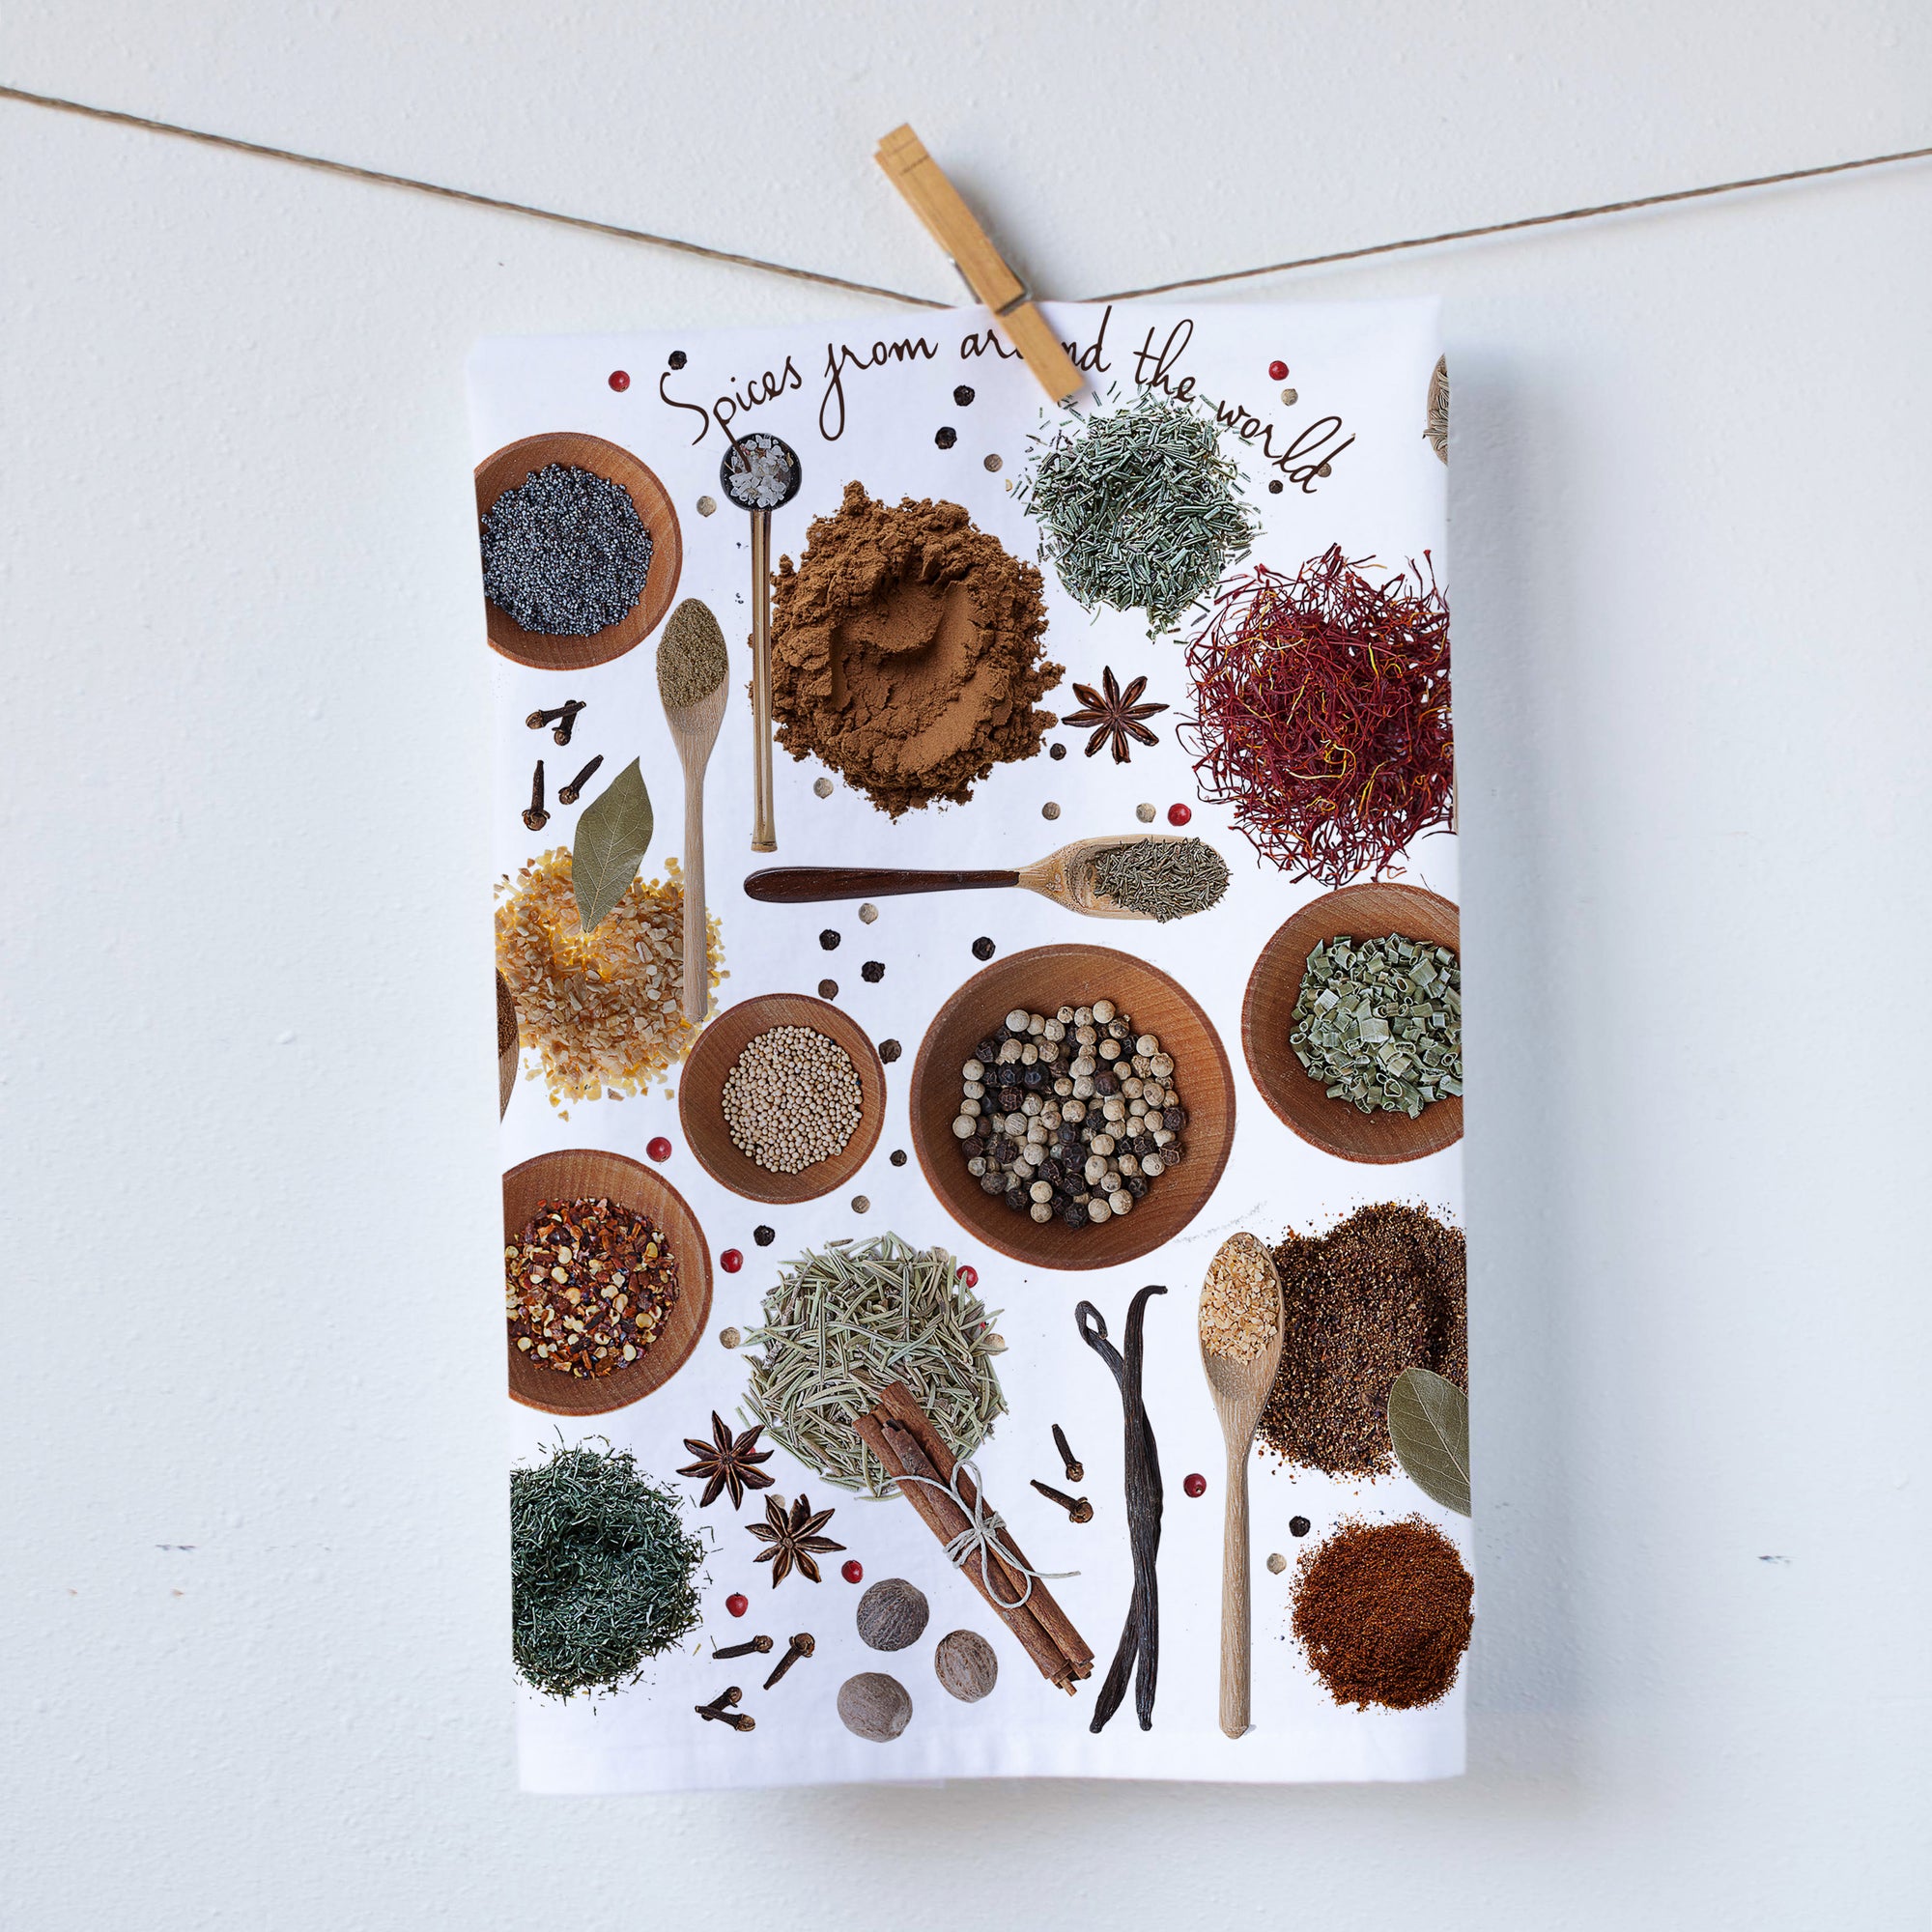 Spices From Around The World (2229809473)